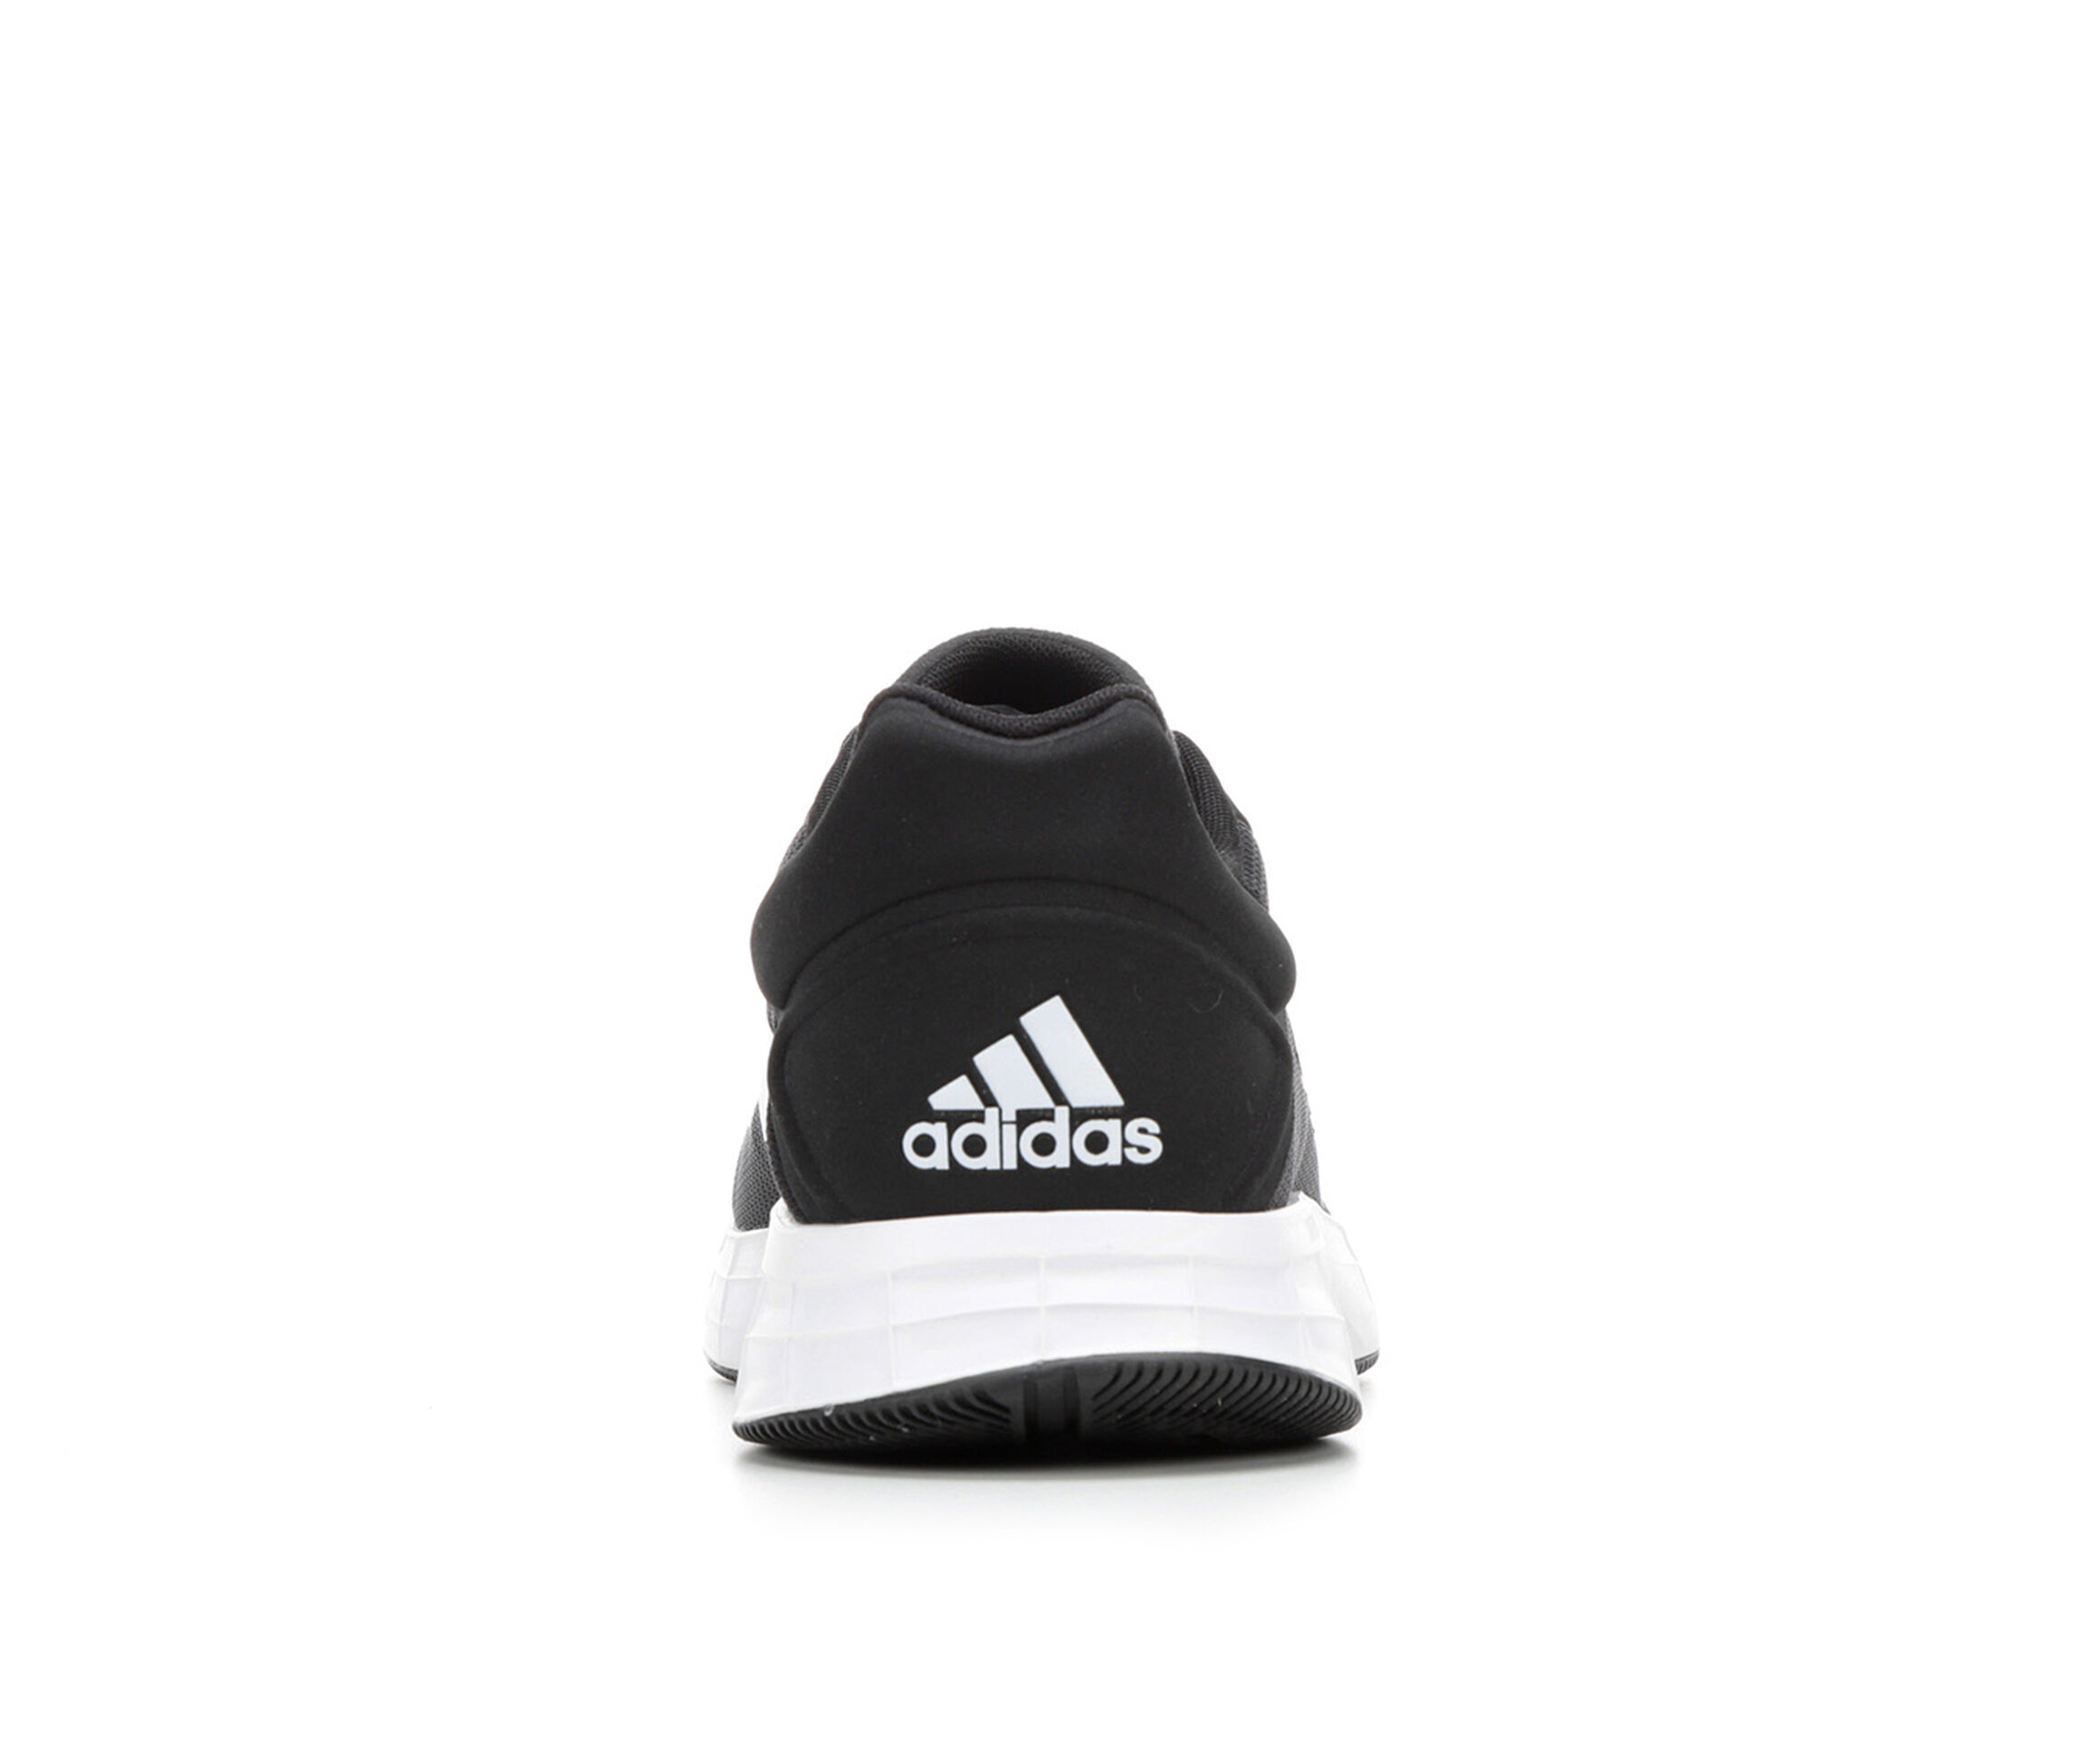 Adidas Shoes, Sneakers & Accessories | Shoe Carnival